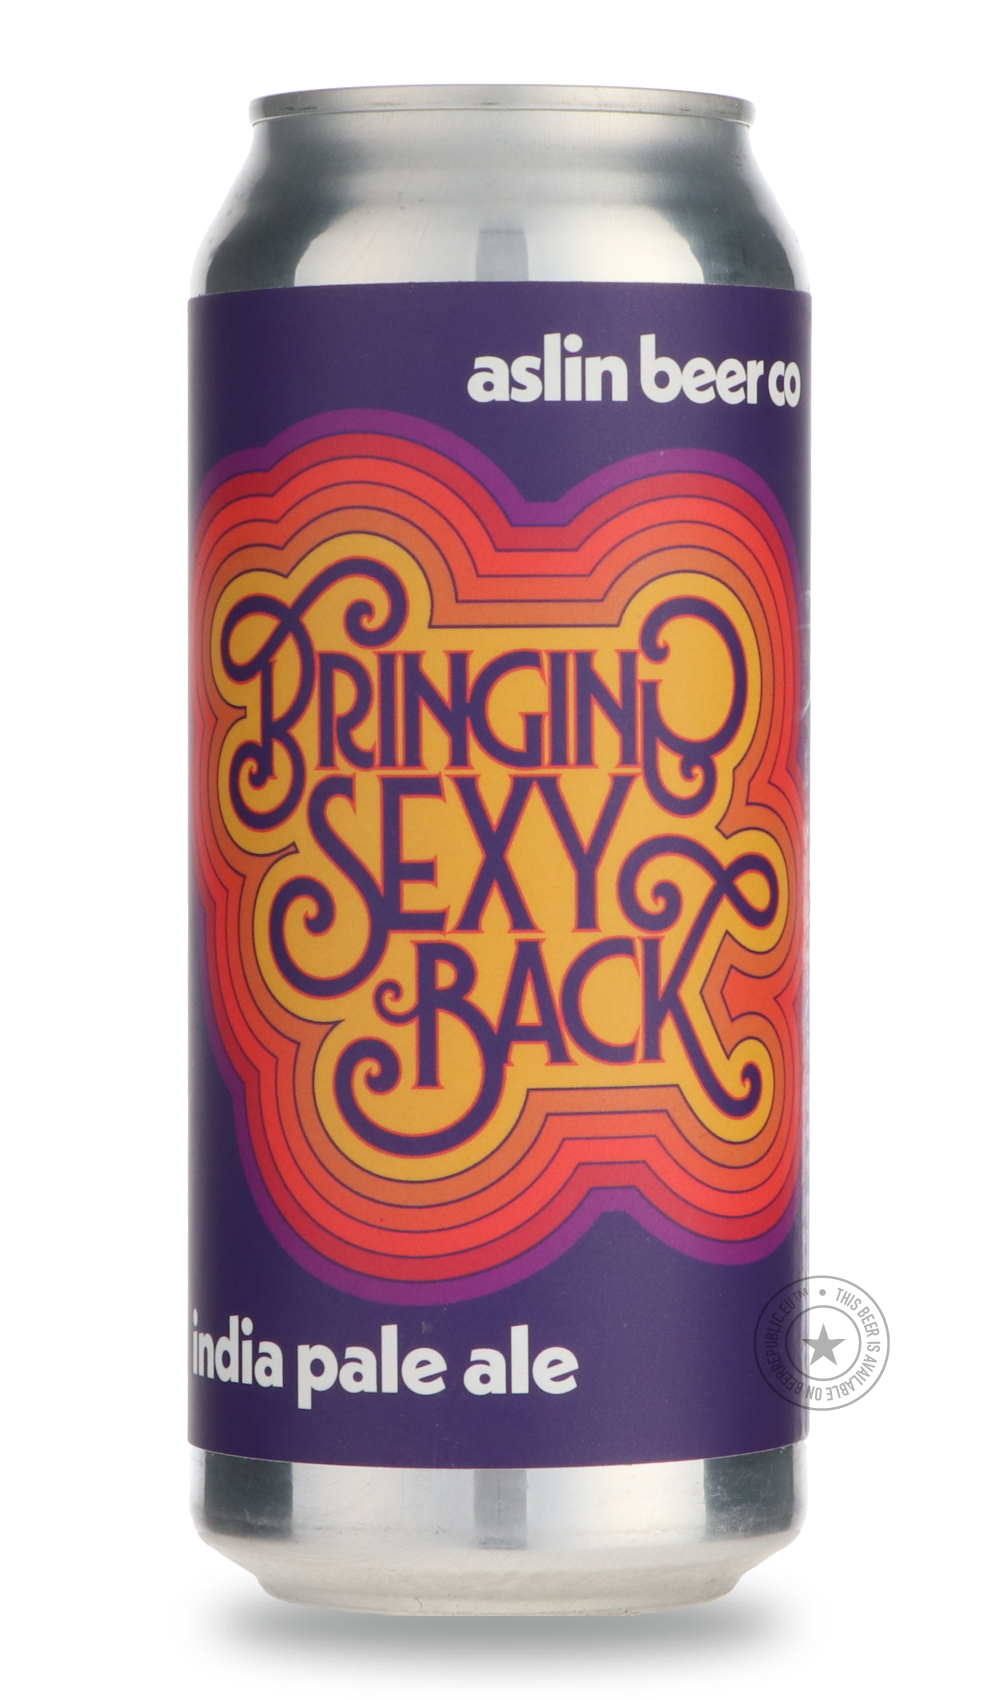 -Aslin- Bringing Sexy Back-IPA- Only @ Beer Republic - The best online beer store for American & Canadian craft beer - Buy beer online from the USA and Canada - Bier online kopen - Amerikaans bier kopen - Craft beer store - Craft beer kopen - Amerikanisch bier kaufen - Bier online kaufen - Acheter biere online - IPA - Stout - Porter - New England IPA - Hazy IPA - Imperial Stout - Barrel Aged - Barrel Aged Imperial Stout - Brown - Dark beer - Blond - Blonde - Pilsner - Lager - Wheat - Weizen - Amber - Barley